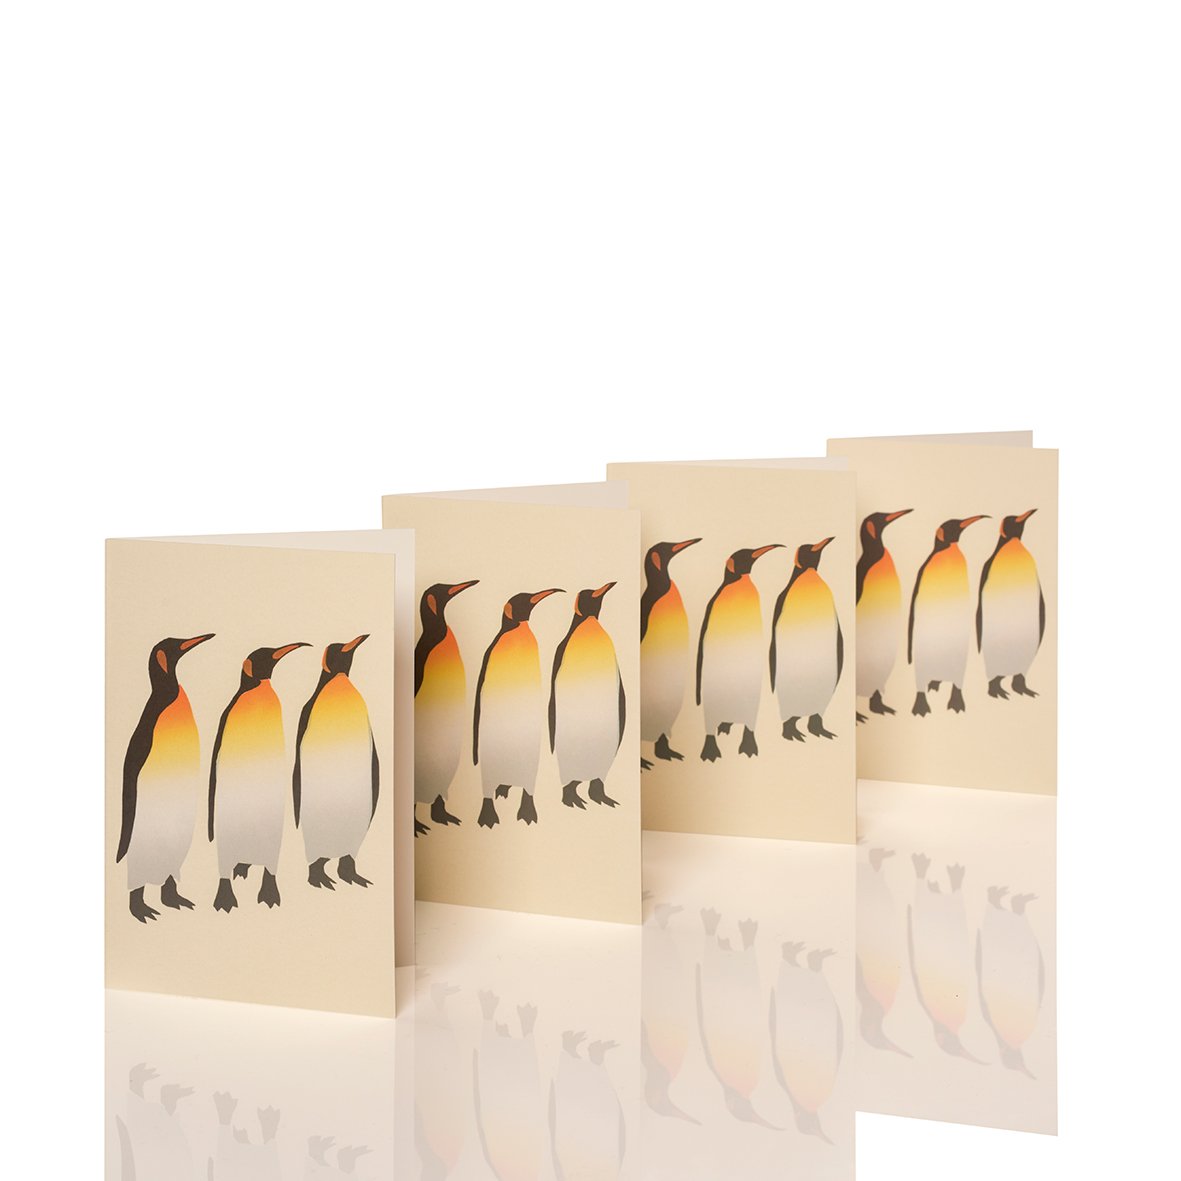 Image of New! King Penguins cards